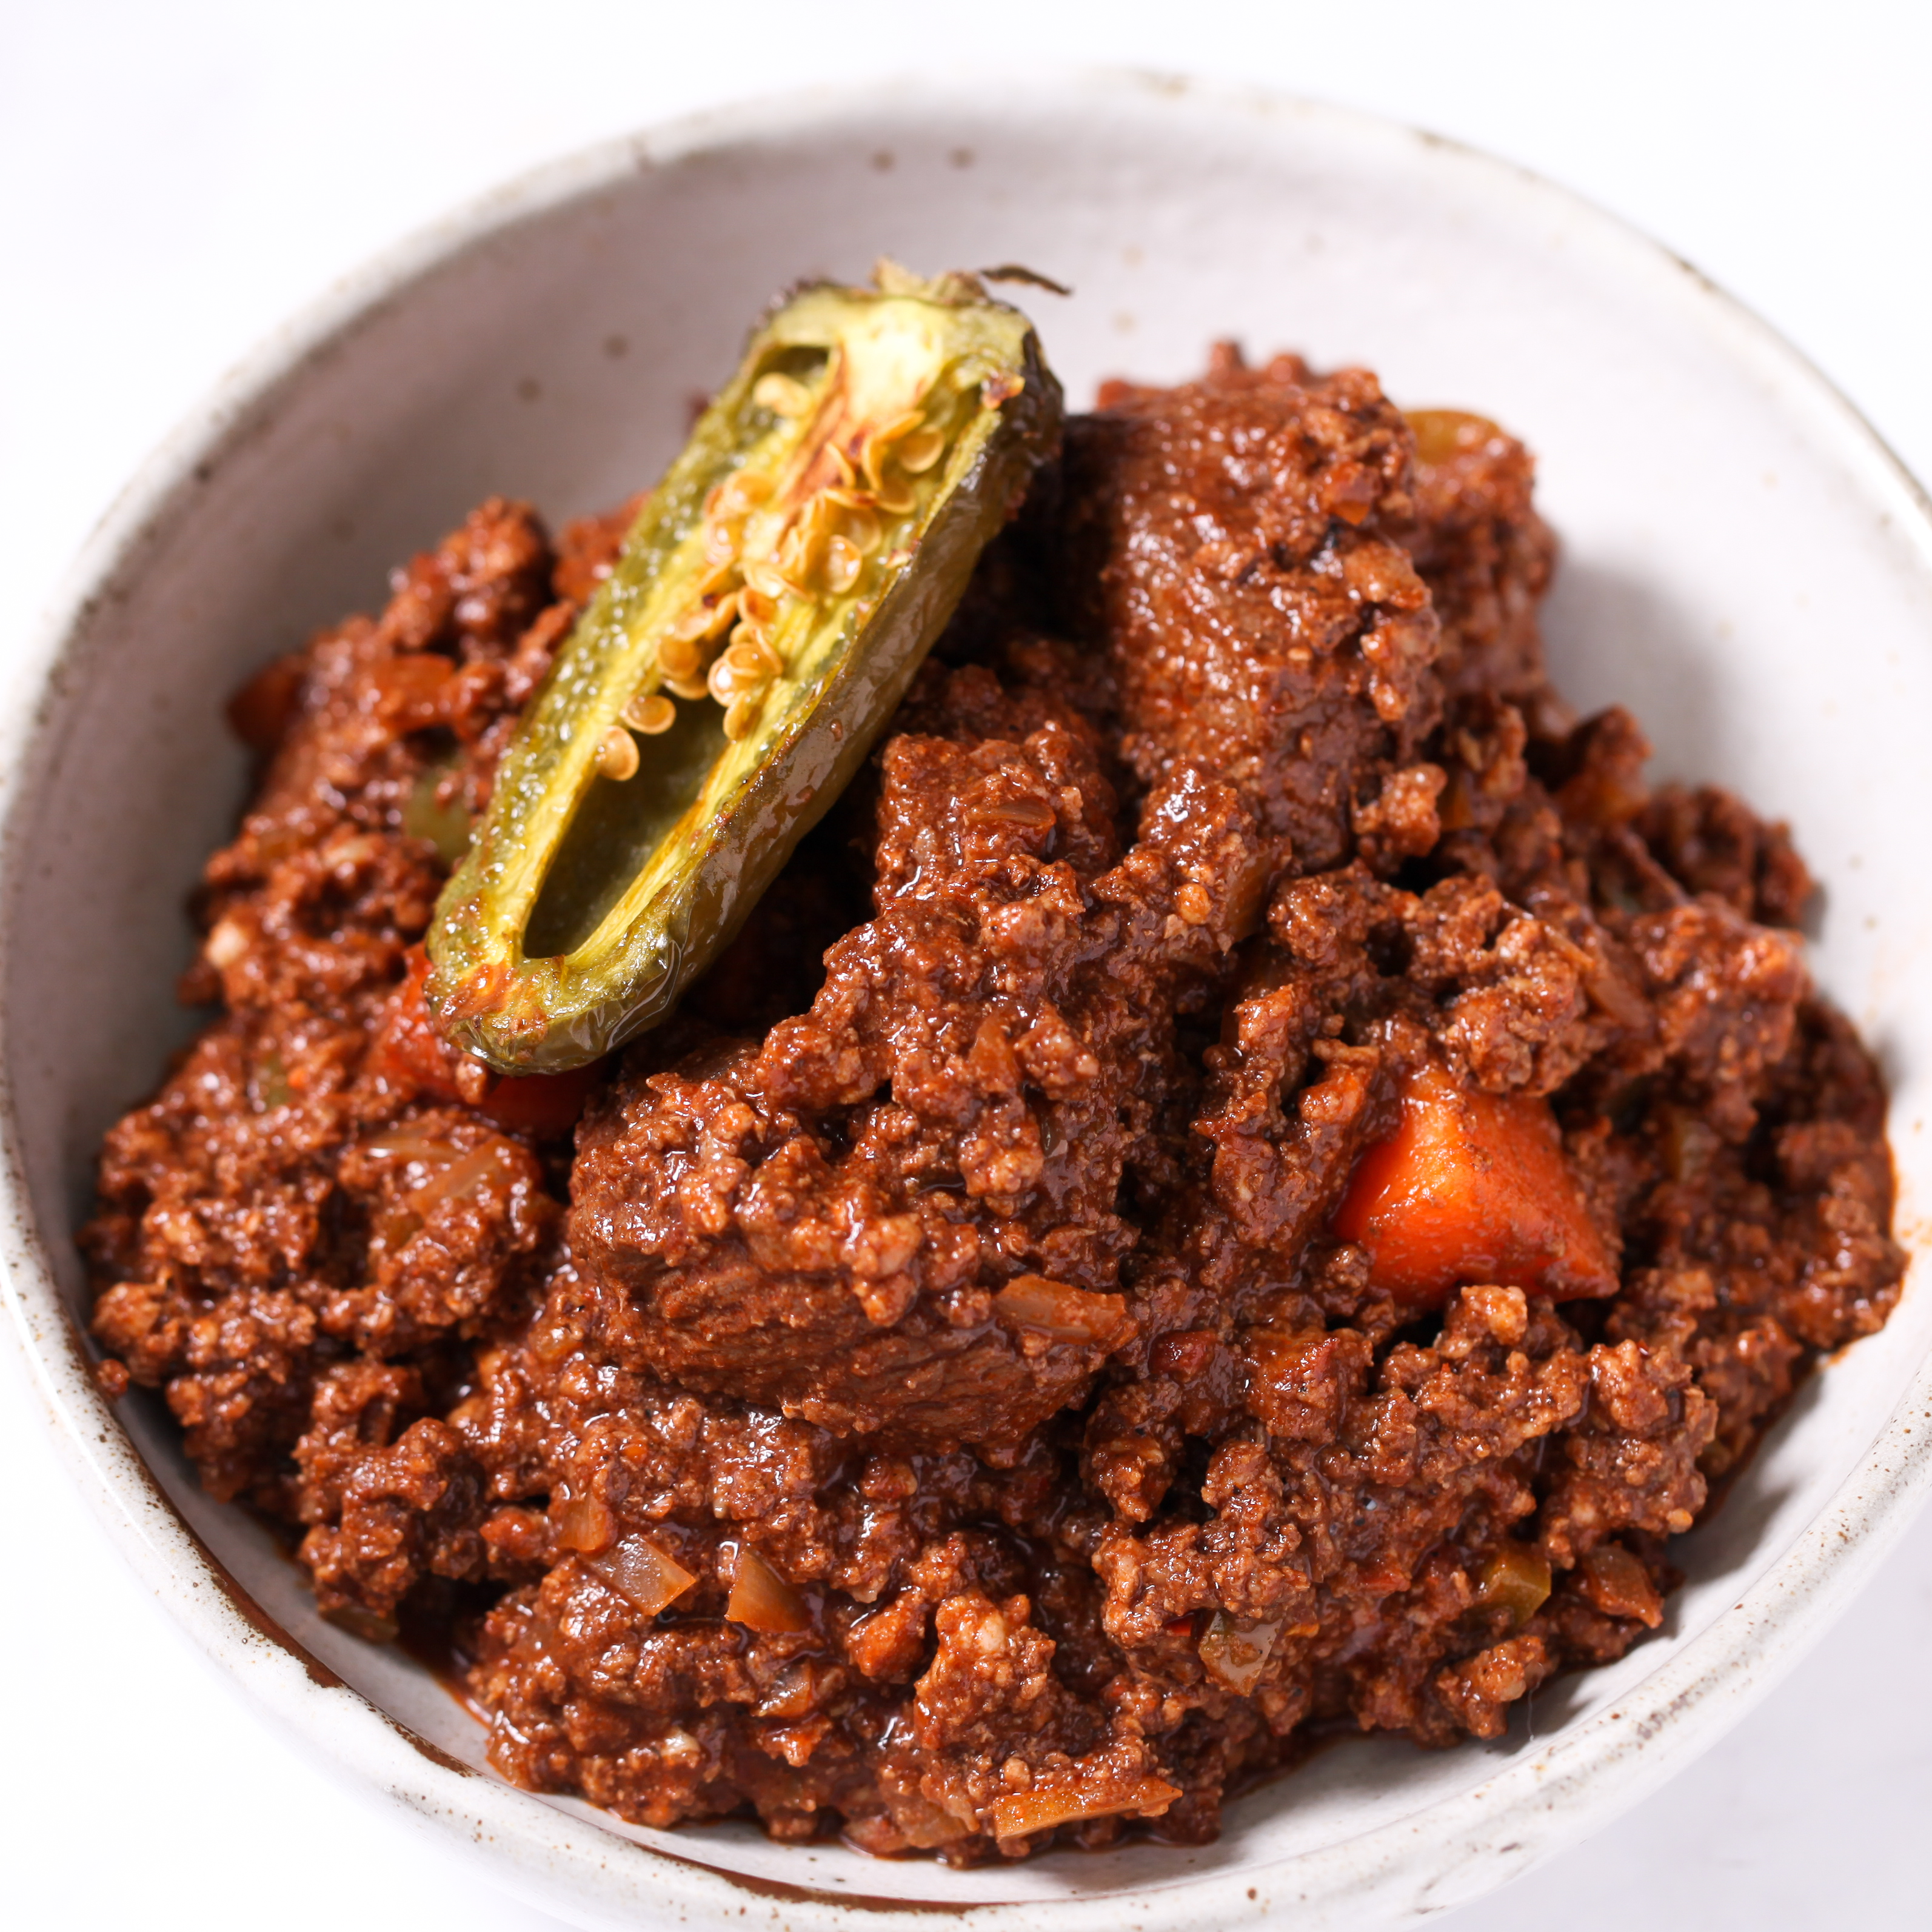 NZ Beef Chili Con Carne Ready Meal